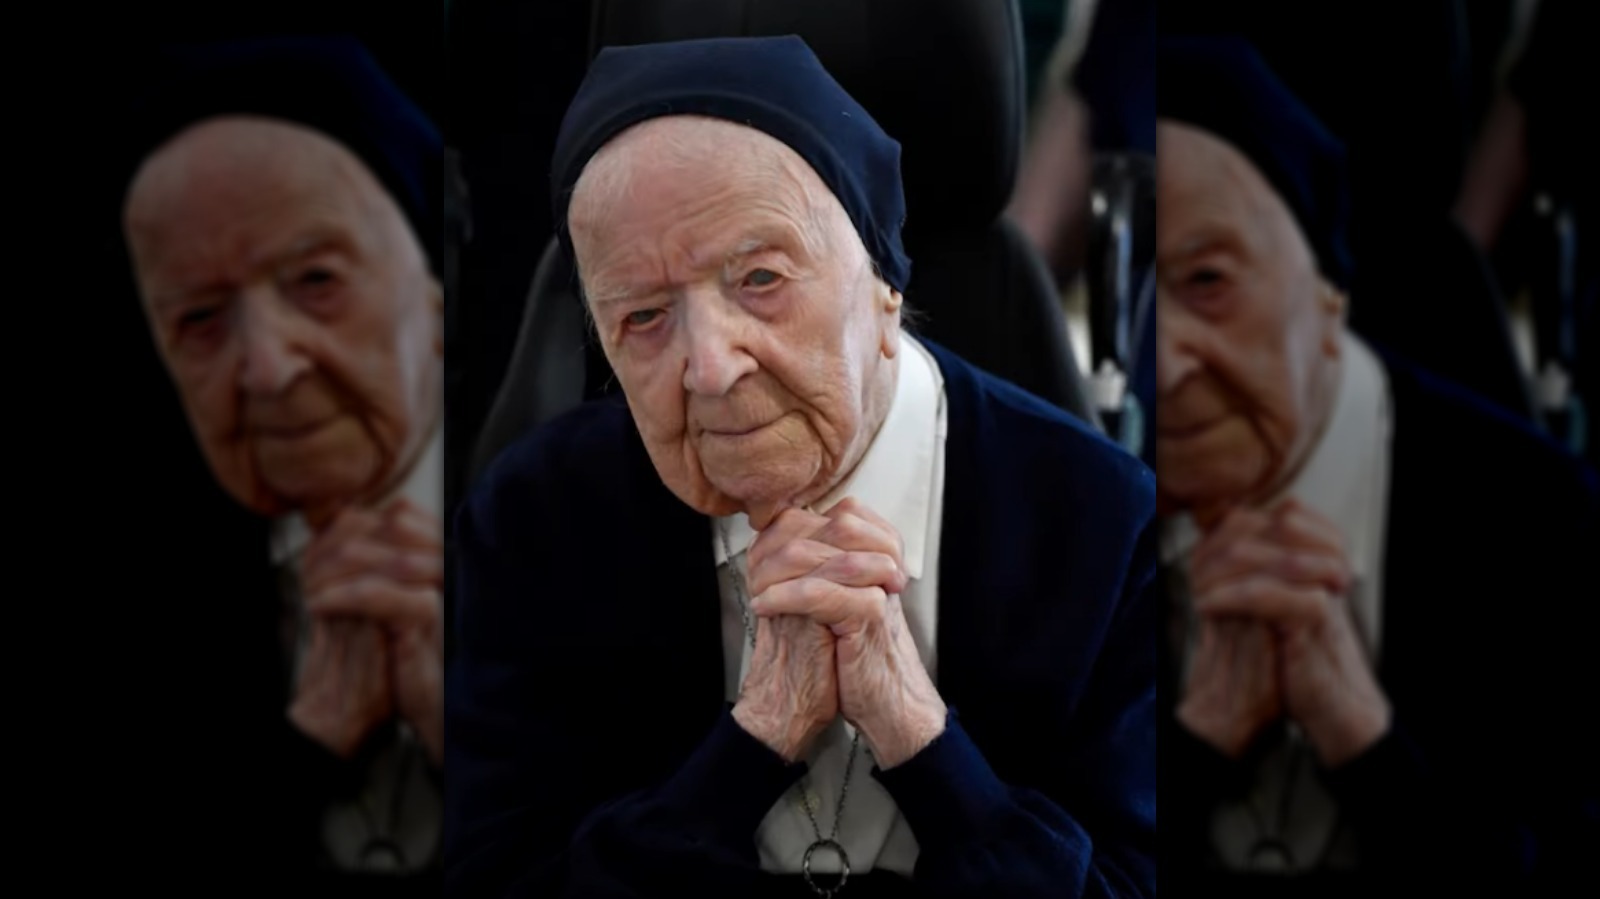 The Guinness World Records Held By Sister André, The World's Oldest Person